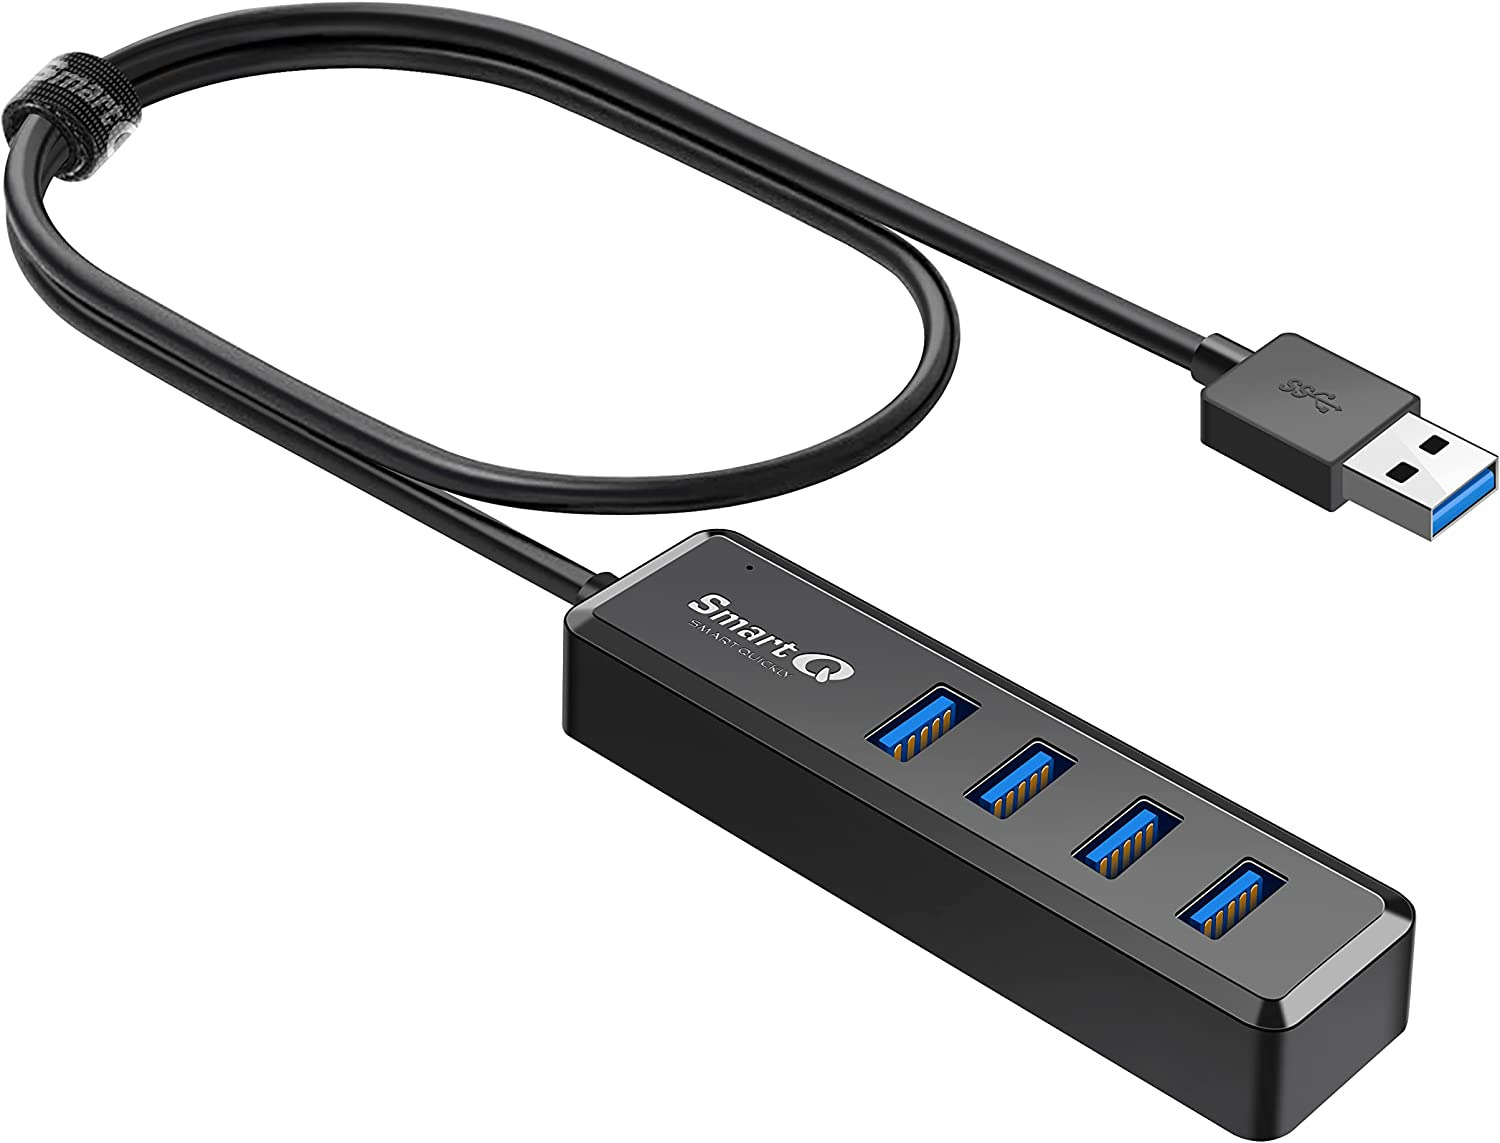 Smartq H302S USB 3.0 Hub for Laptop with 2Ft Long Cable, Multi Port Expander, Fa